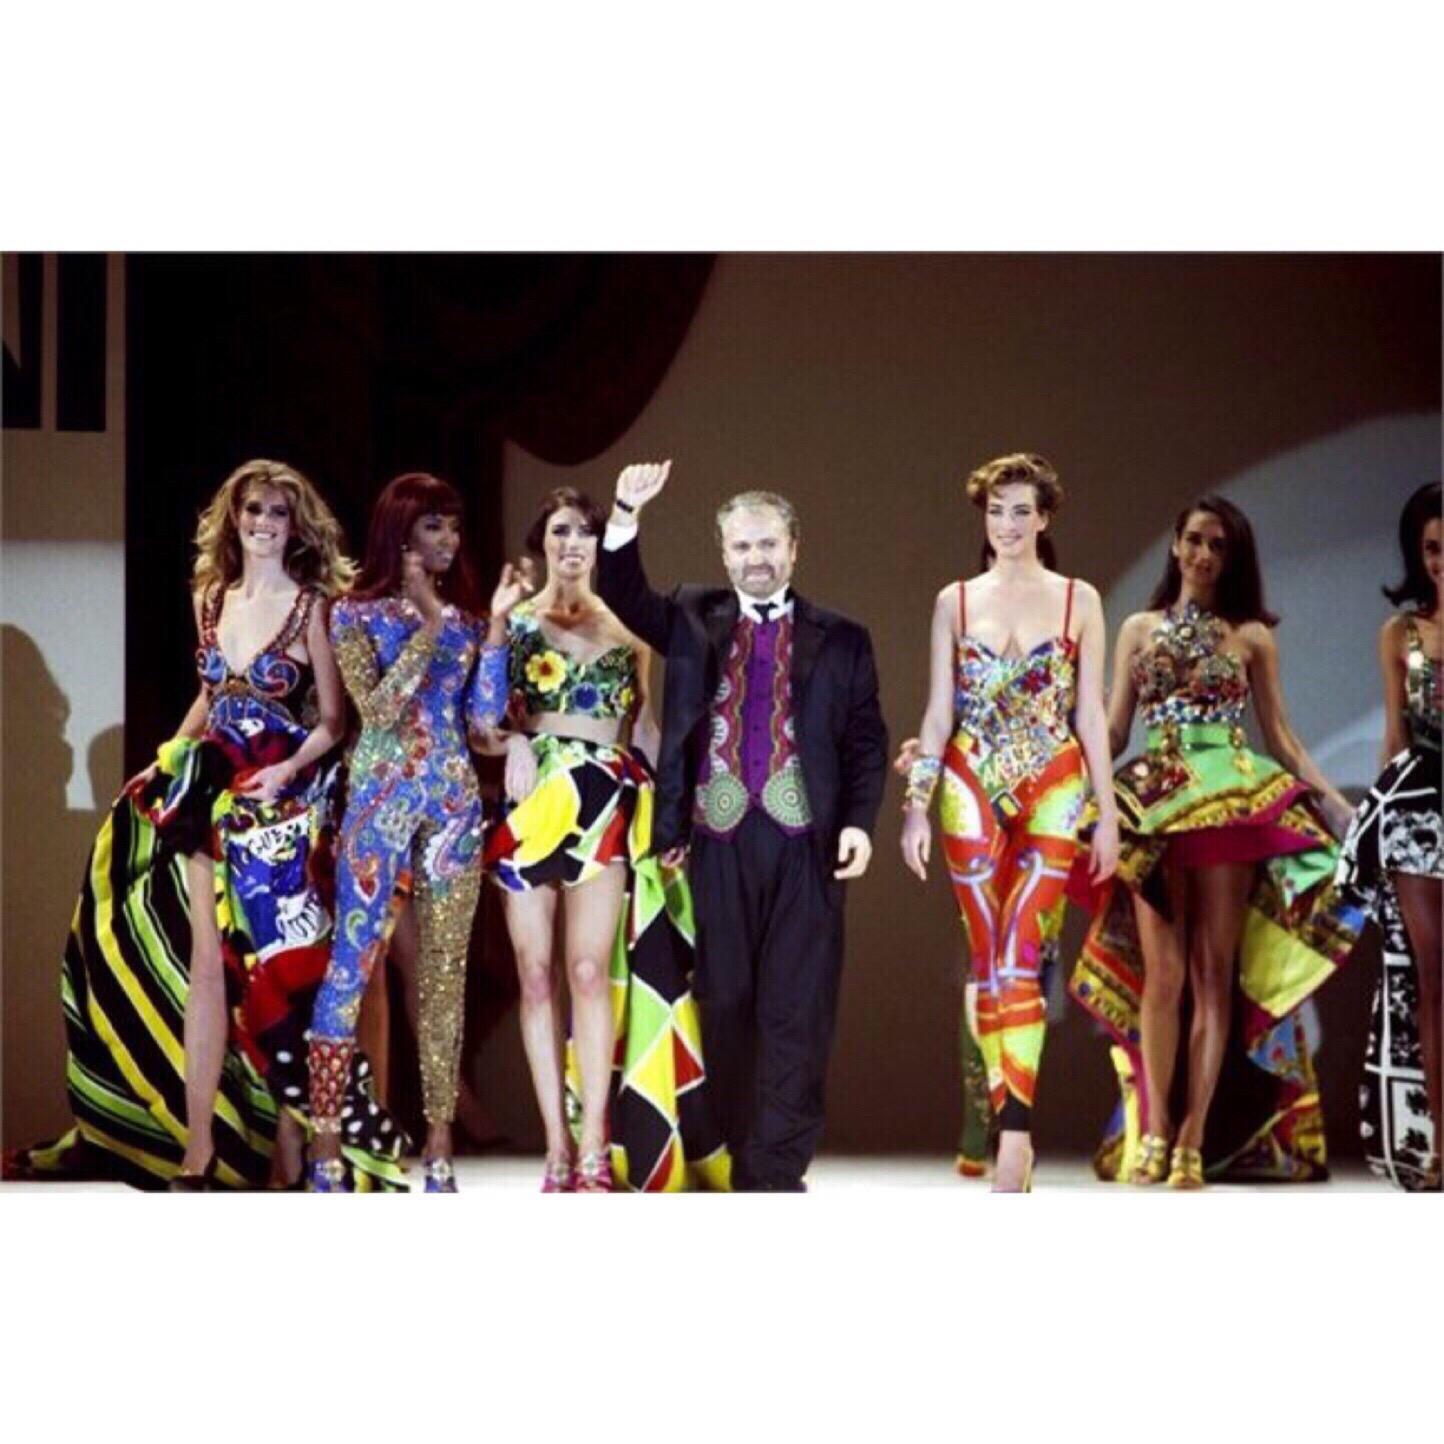 The 1990s can be characterized by a collage of bold color shades, so it is no wonder that Versace was remarkably popular during this time. Featuring a combination of rich colors or patterns superimposed with luxe-inspired prints, Versace aesthetic